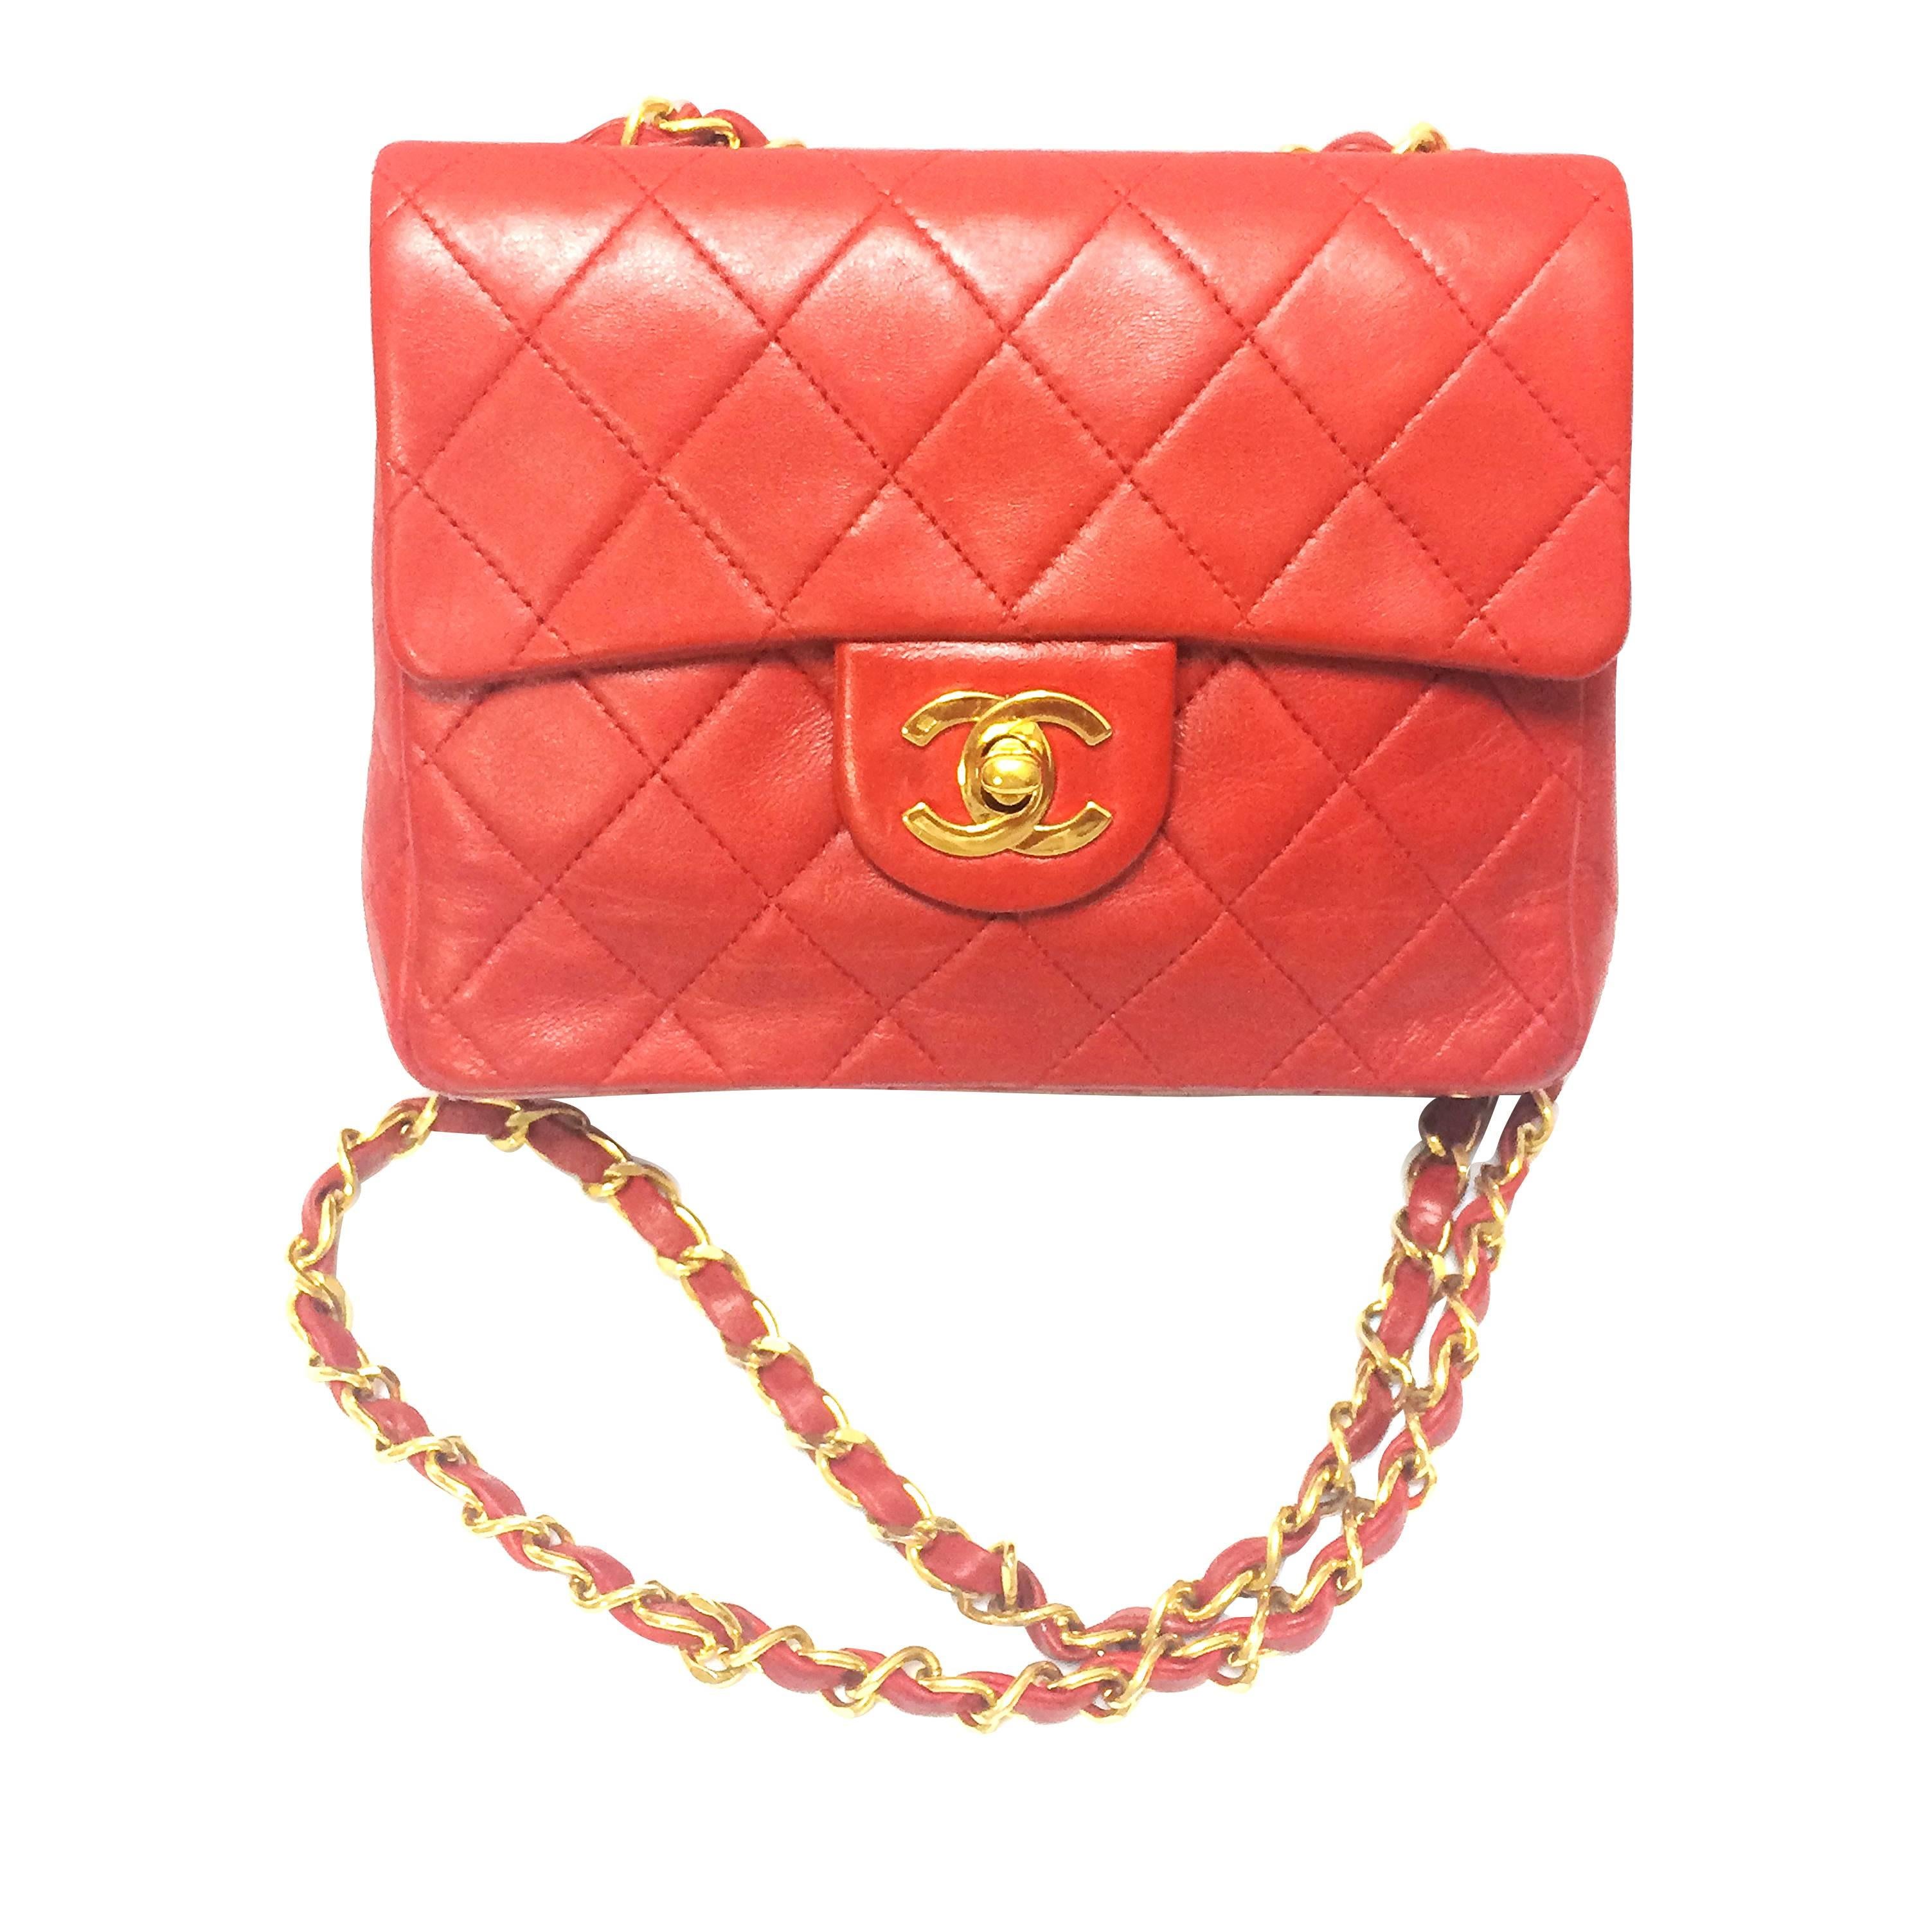 Vintage CHANEL lipstick red lambskin purse with golden CC and chain strap.